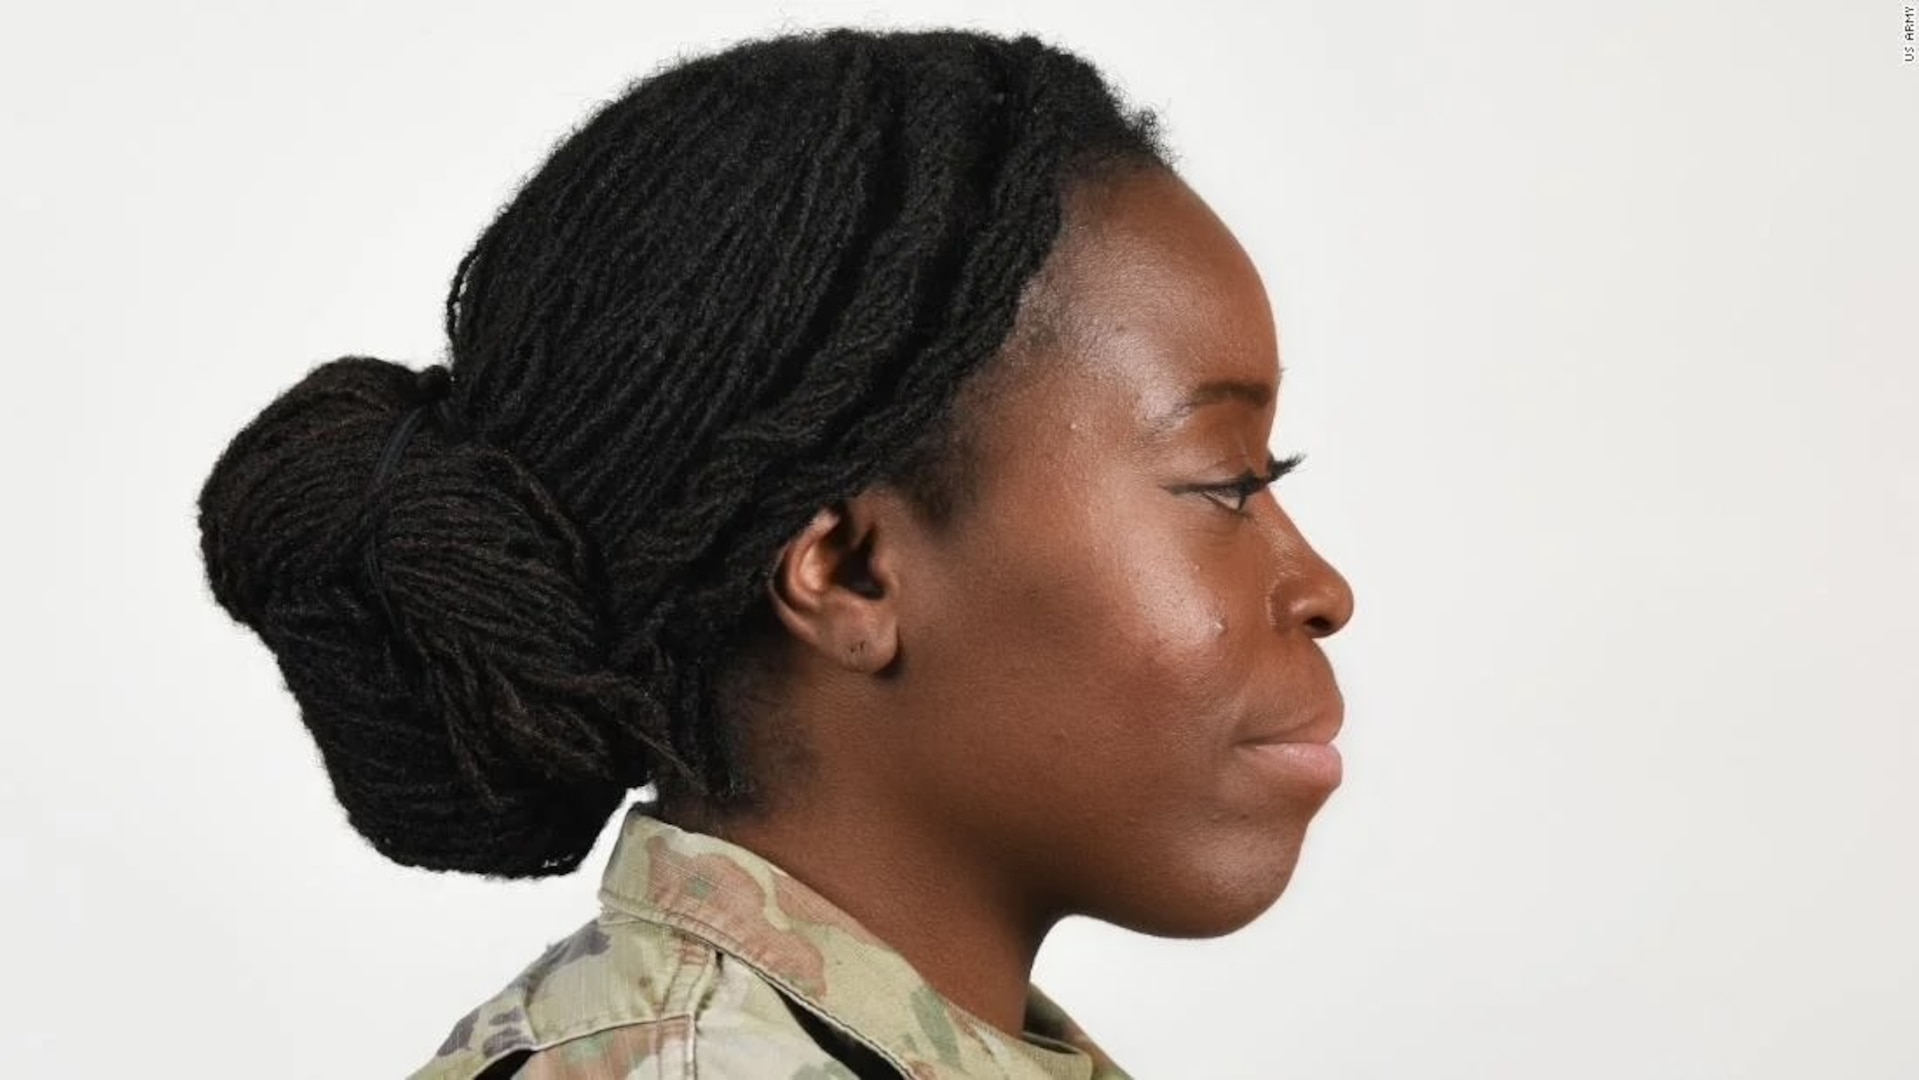 National Guard Soldier Helps Change Army Hair Regulation National Guard Guard News The National Guard